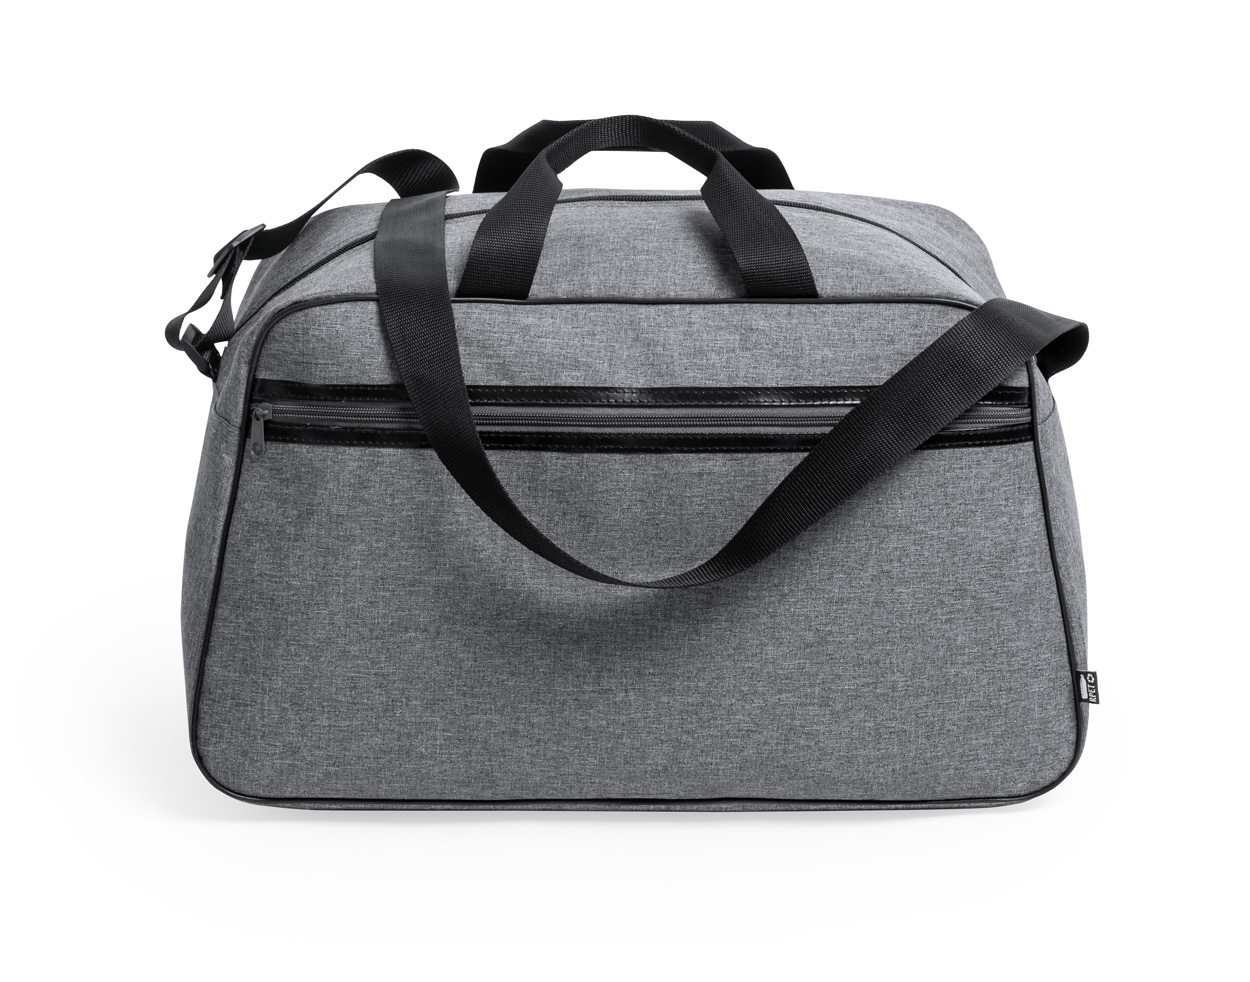 Polyester sports bag HOLTRUM made of recycled material - grey